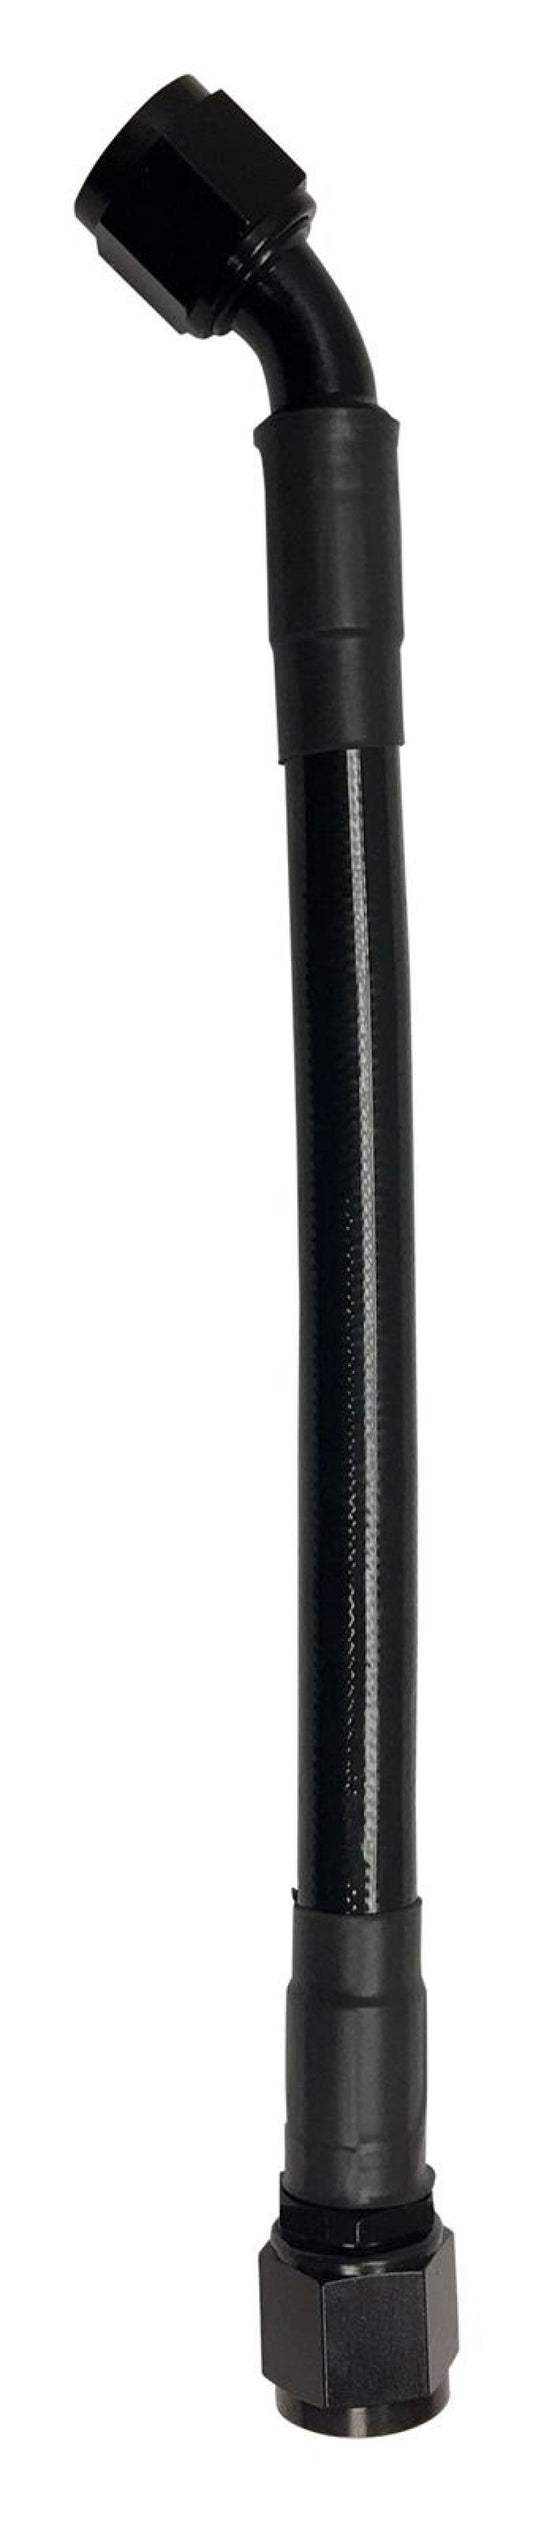 Fragola -10AN Ext Black PTFE Hose Assembly Straight x 45 Degree 96in